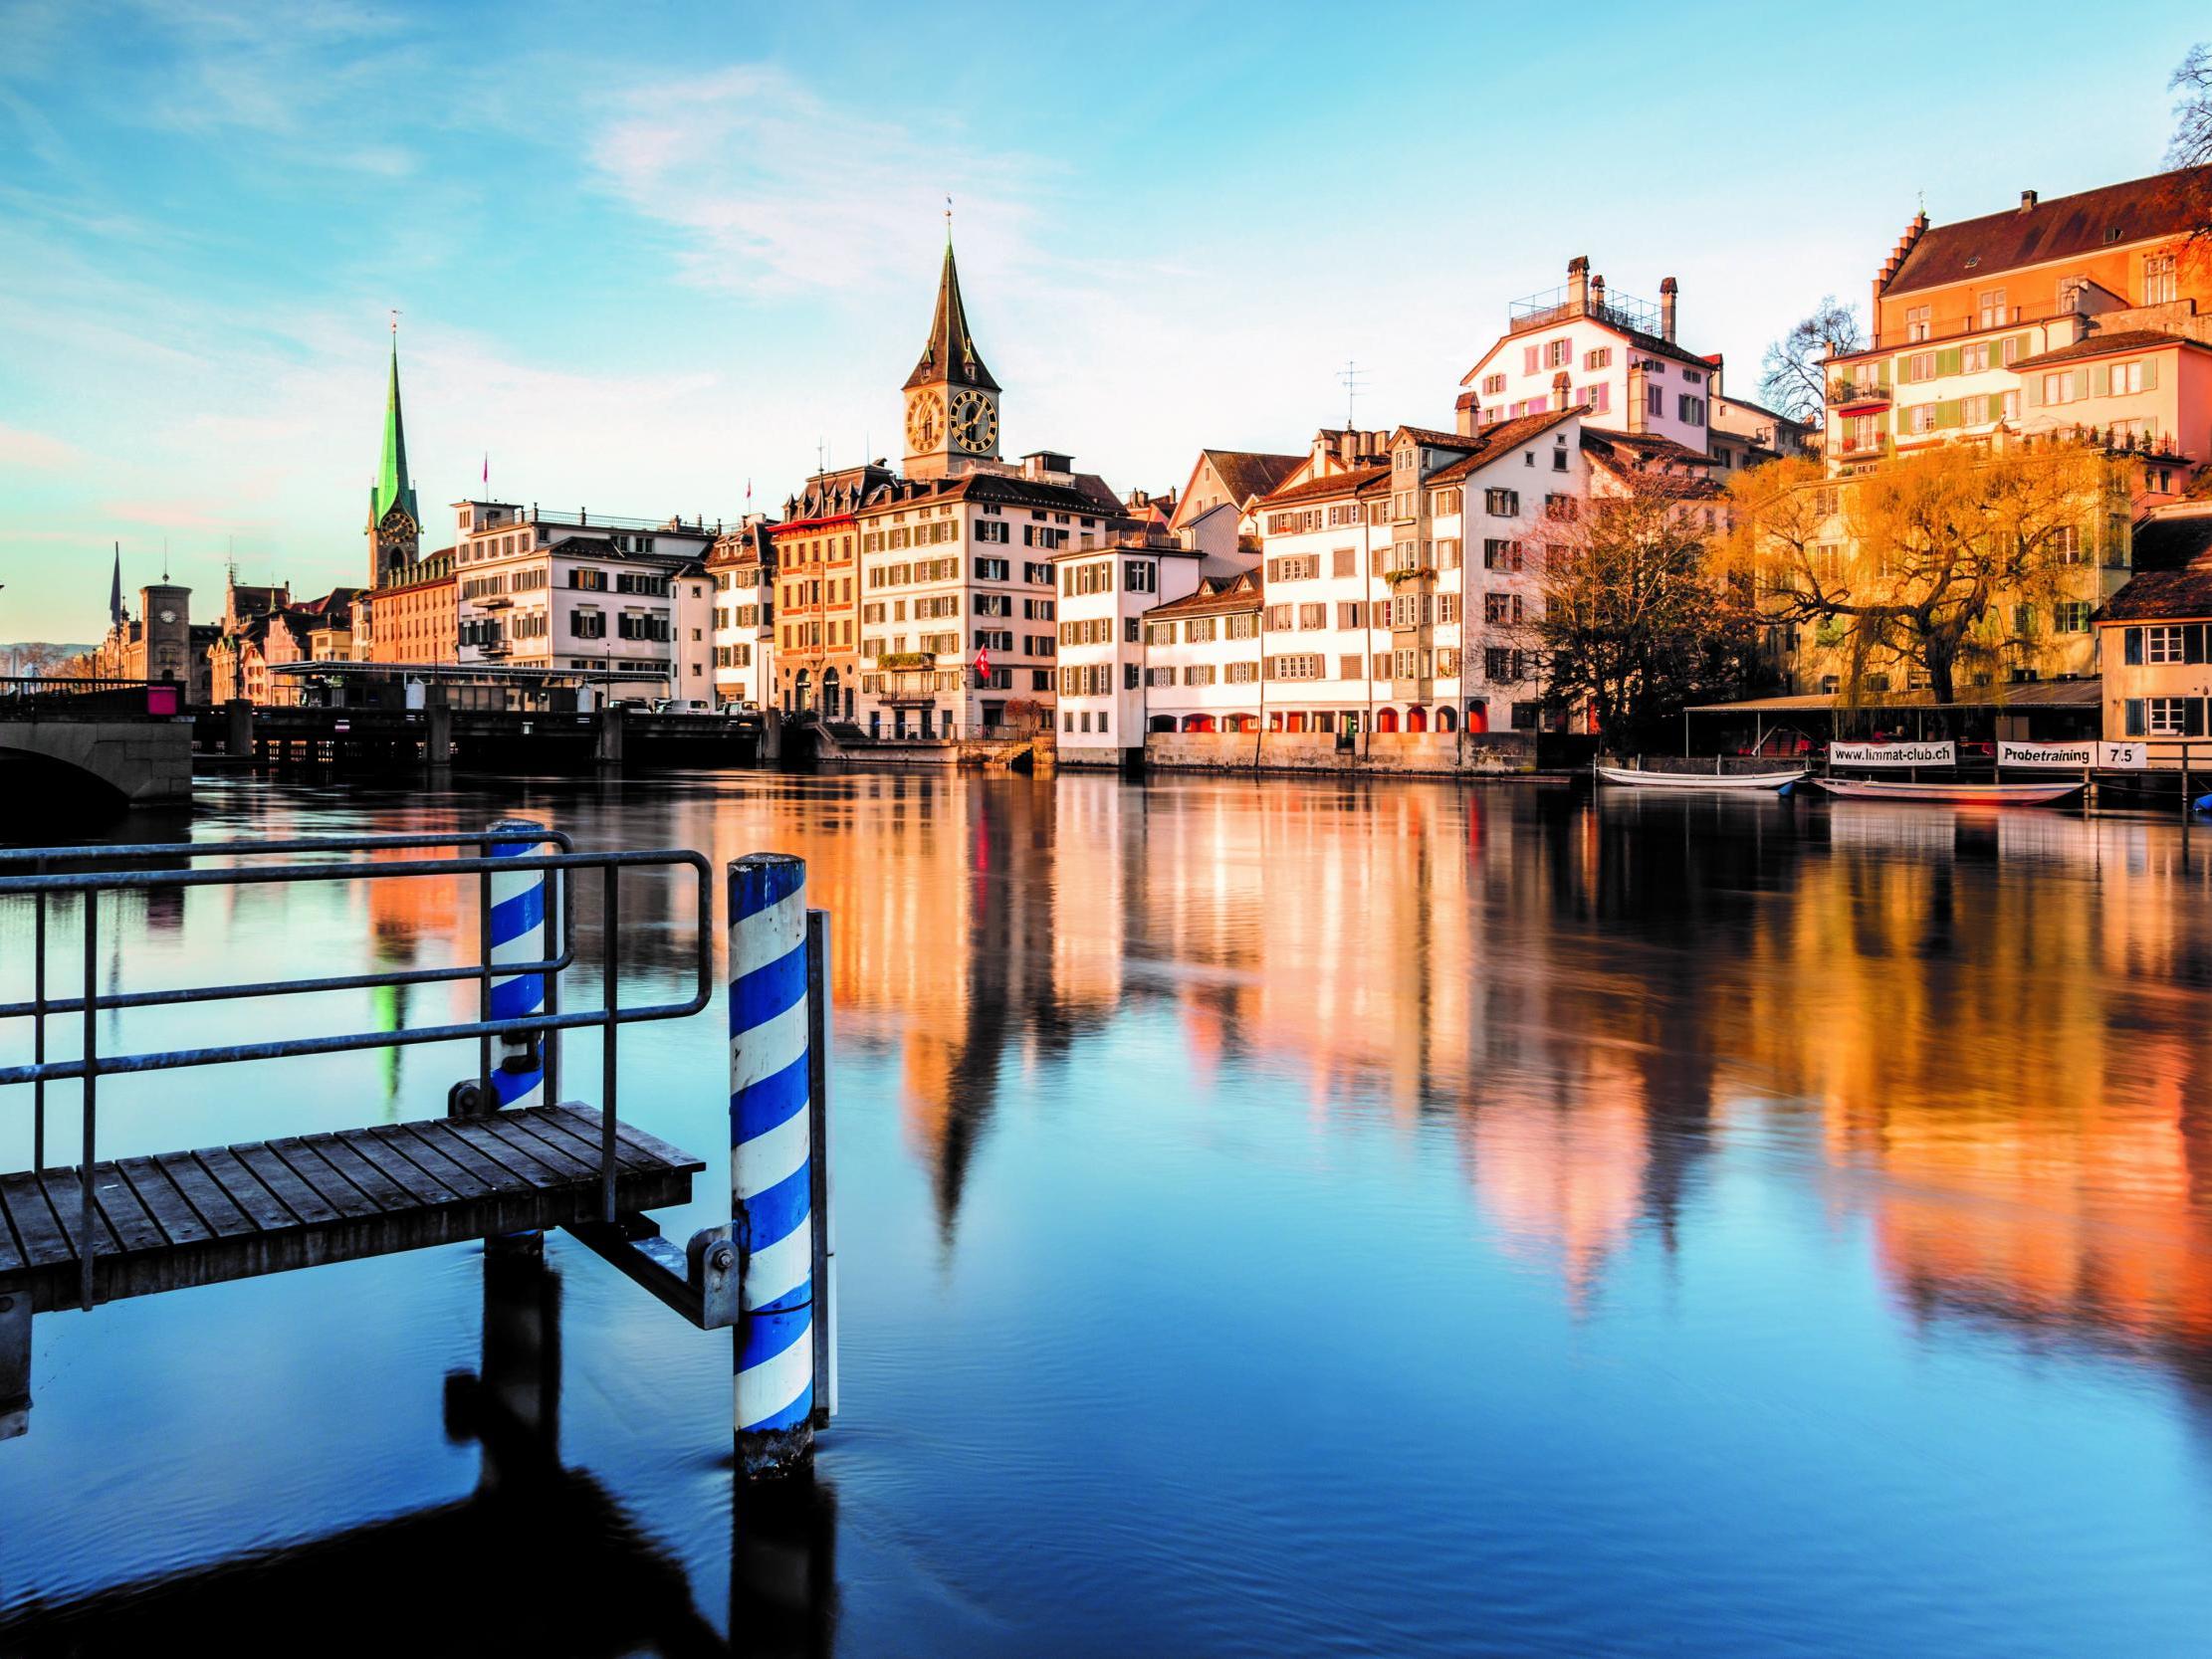 The Limmat river runs right through the centre of Zurich